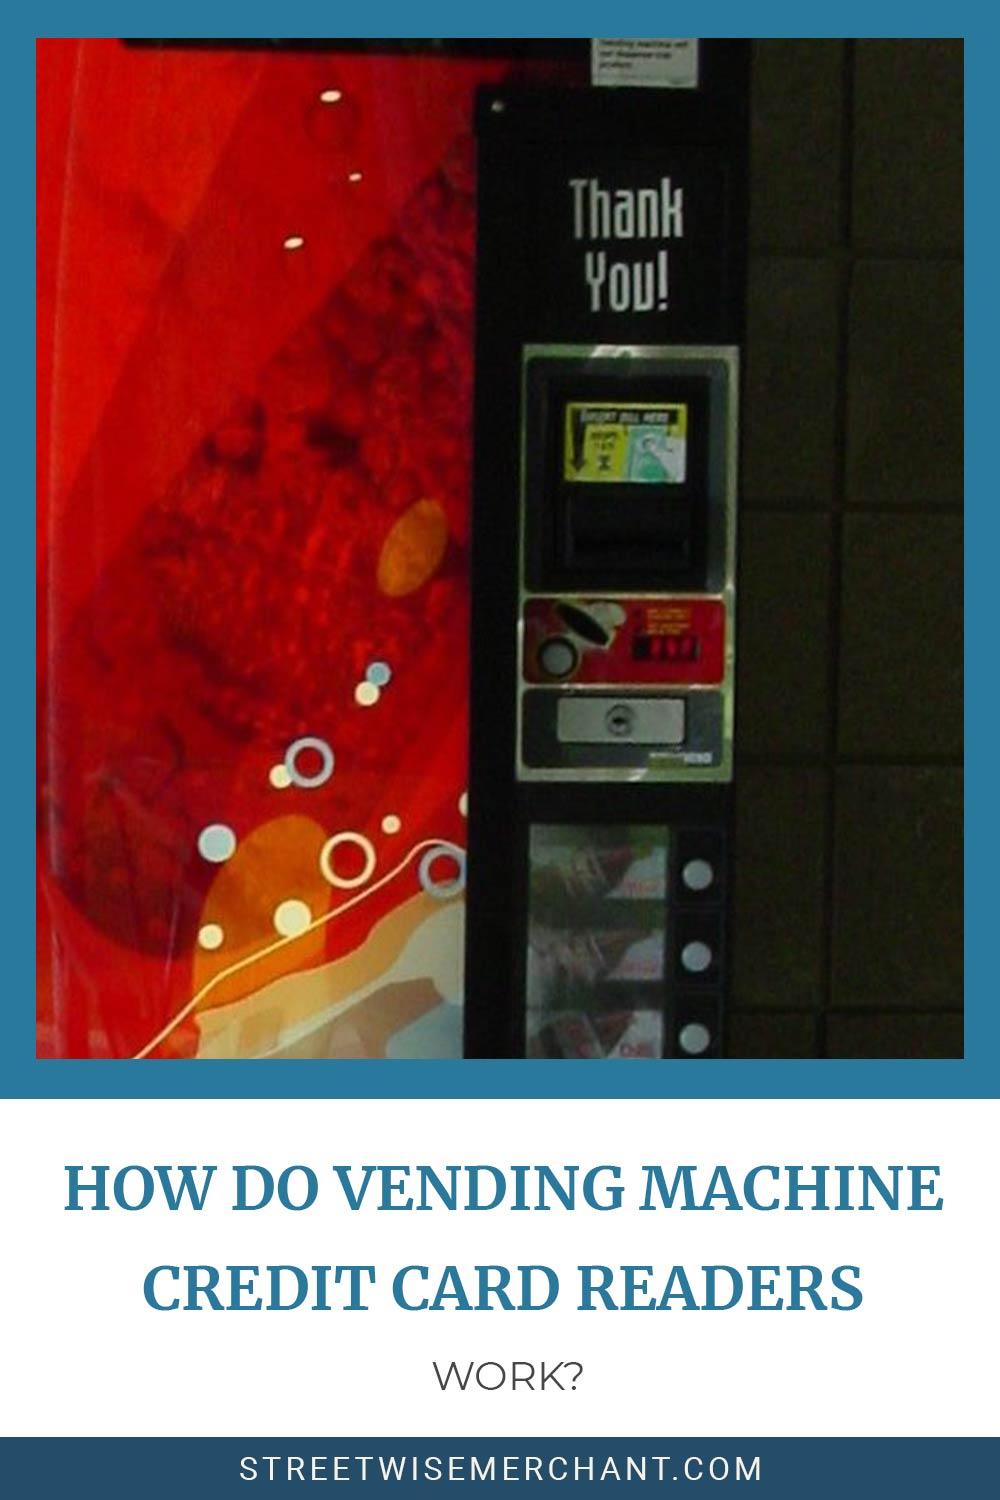 Credit card reader of a vending machine - How Do it Work?